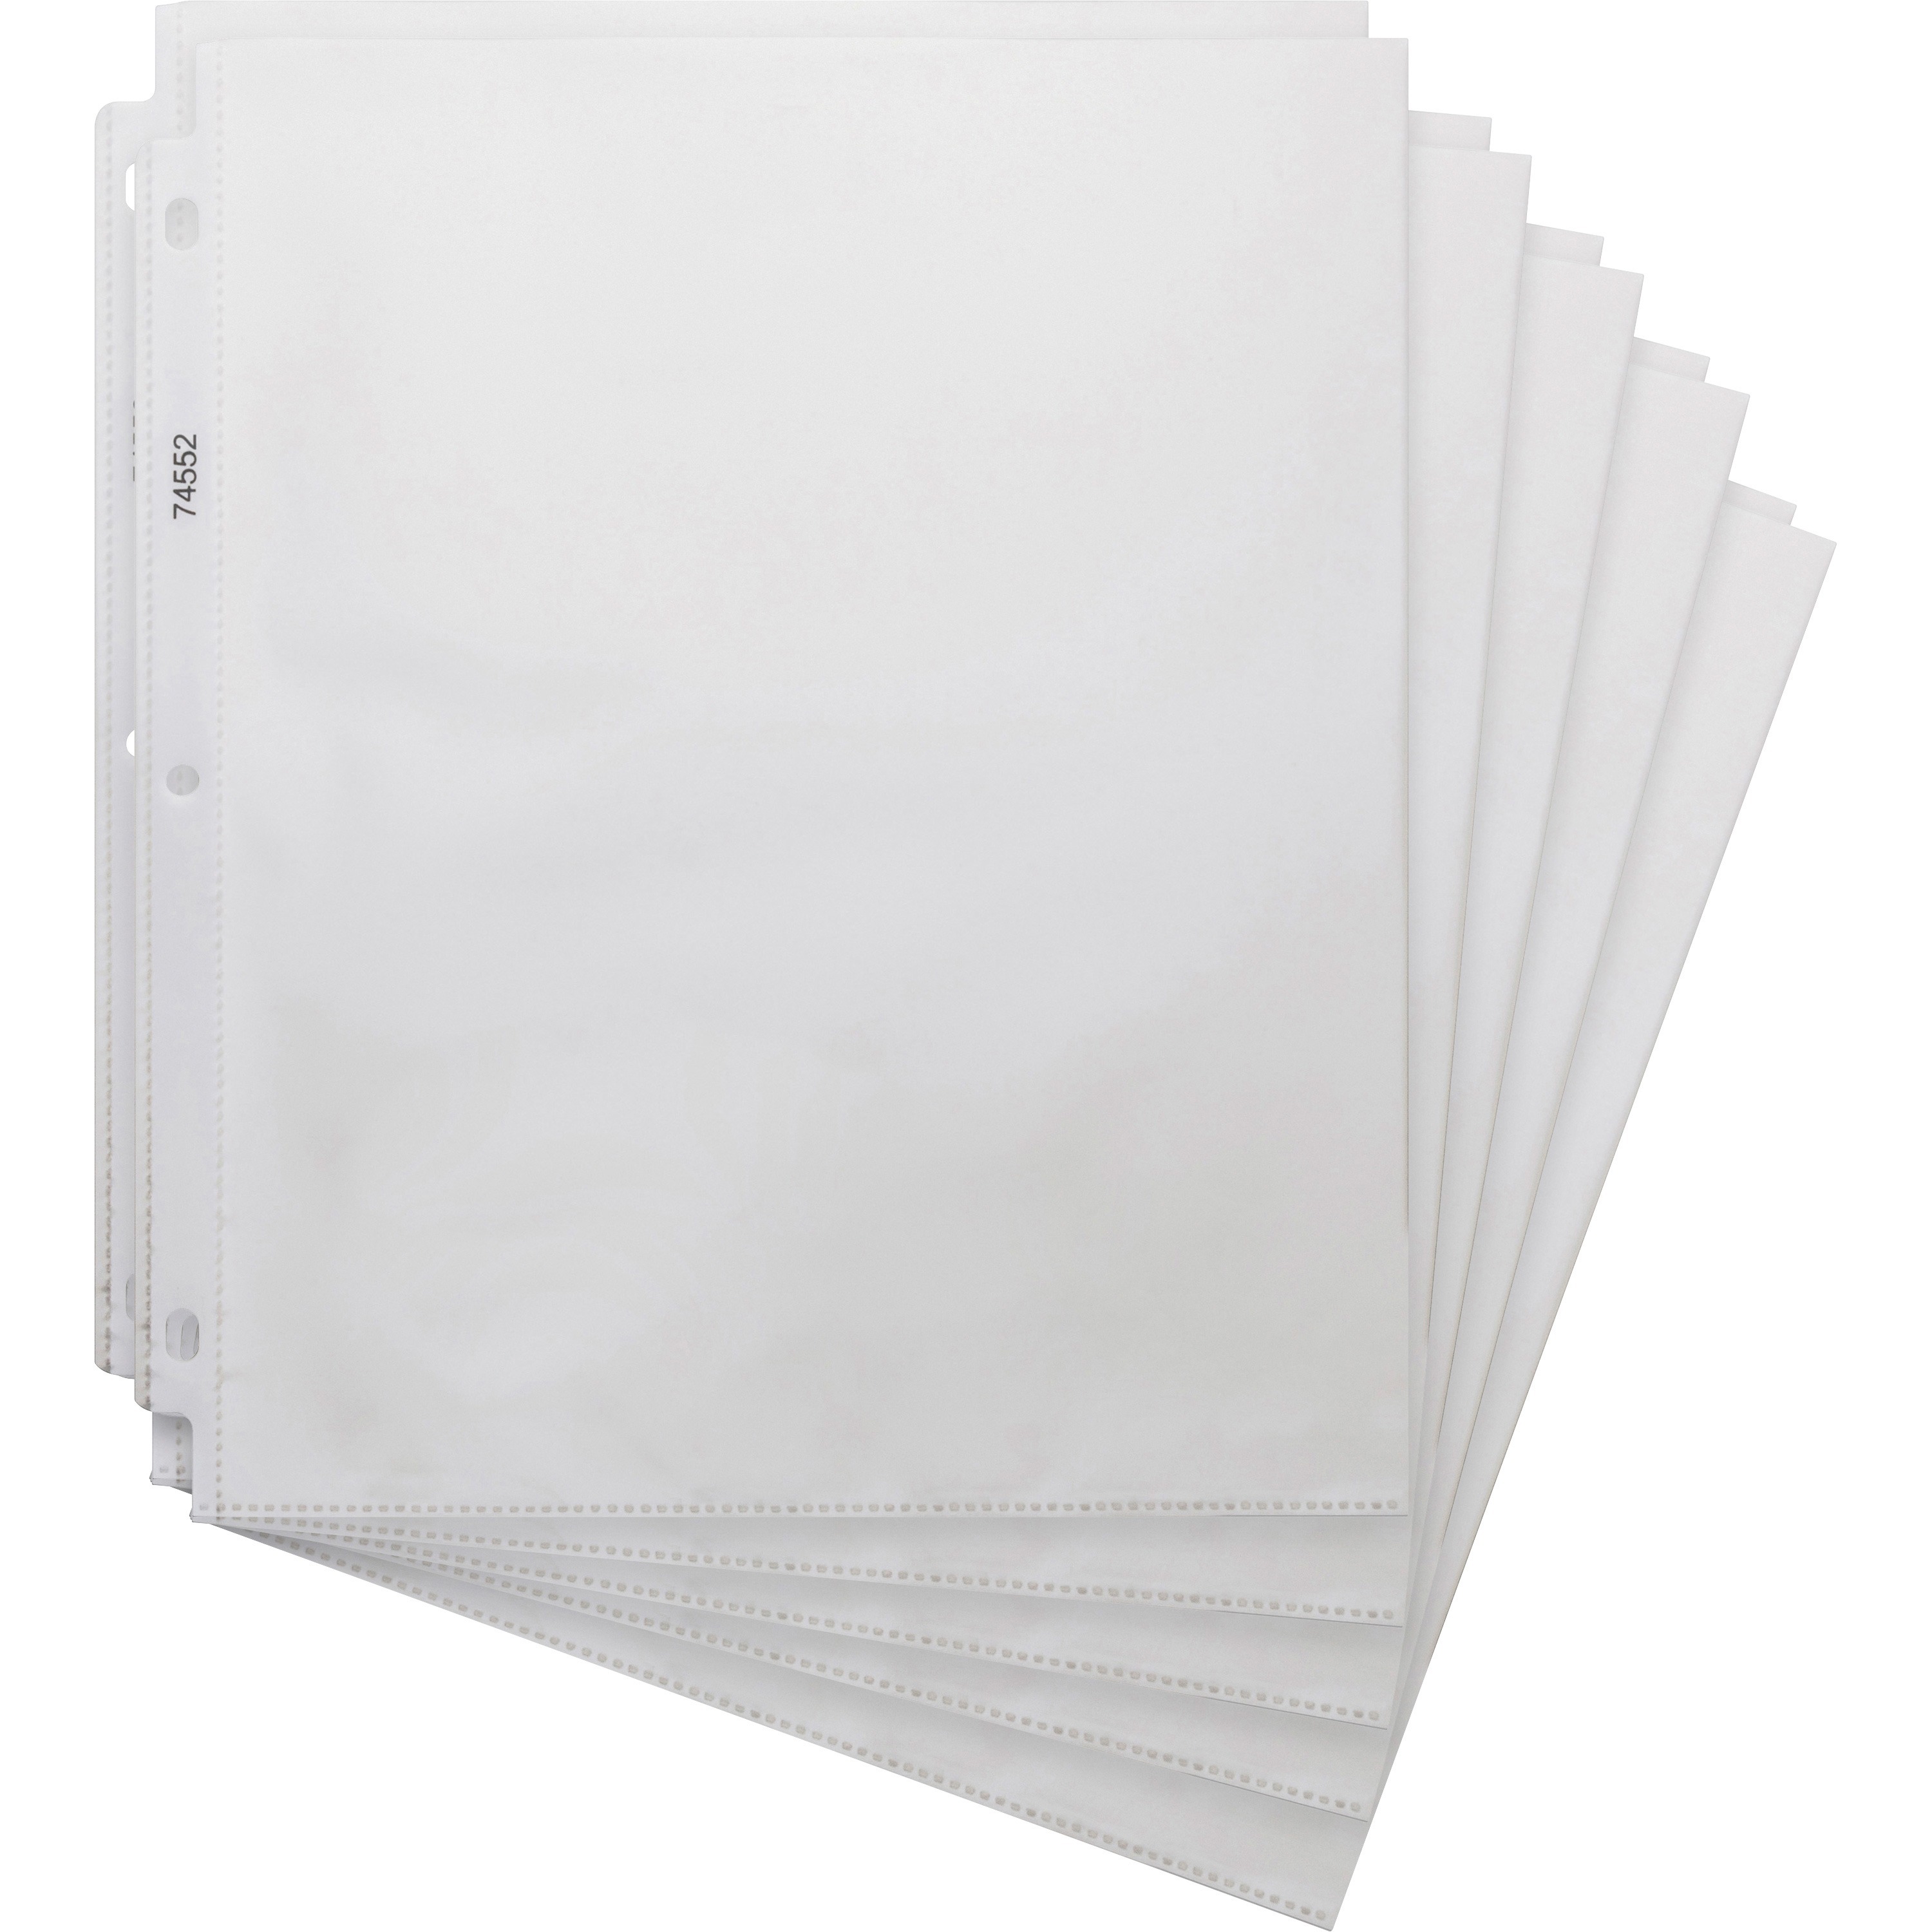 Business Source Heavyweight Sheet Protectors - For Letter 8 1/2 x